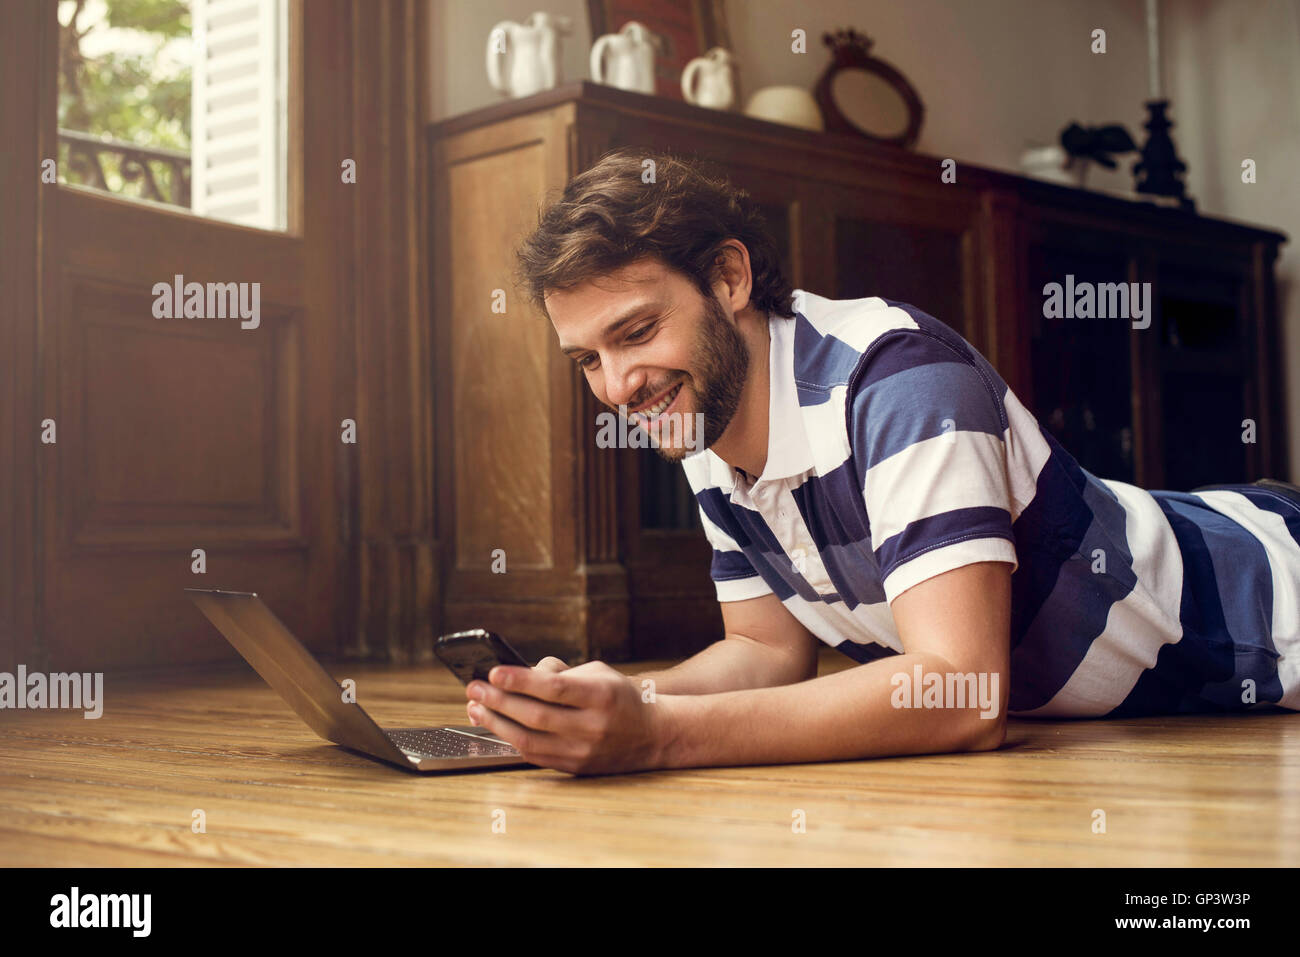 Man lying on floor using laptop and smartphone Banque D'Images